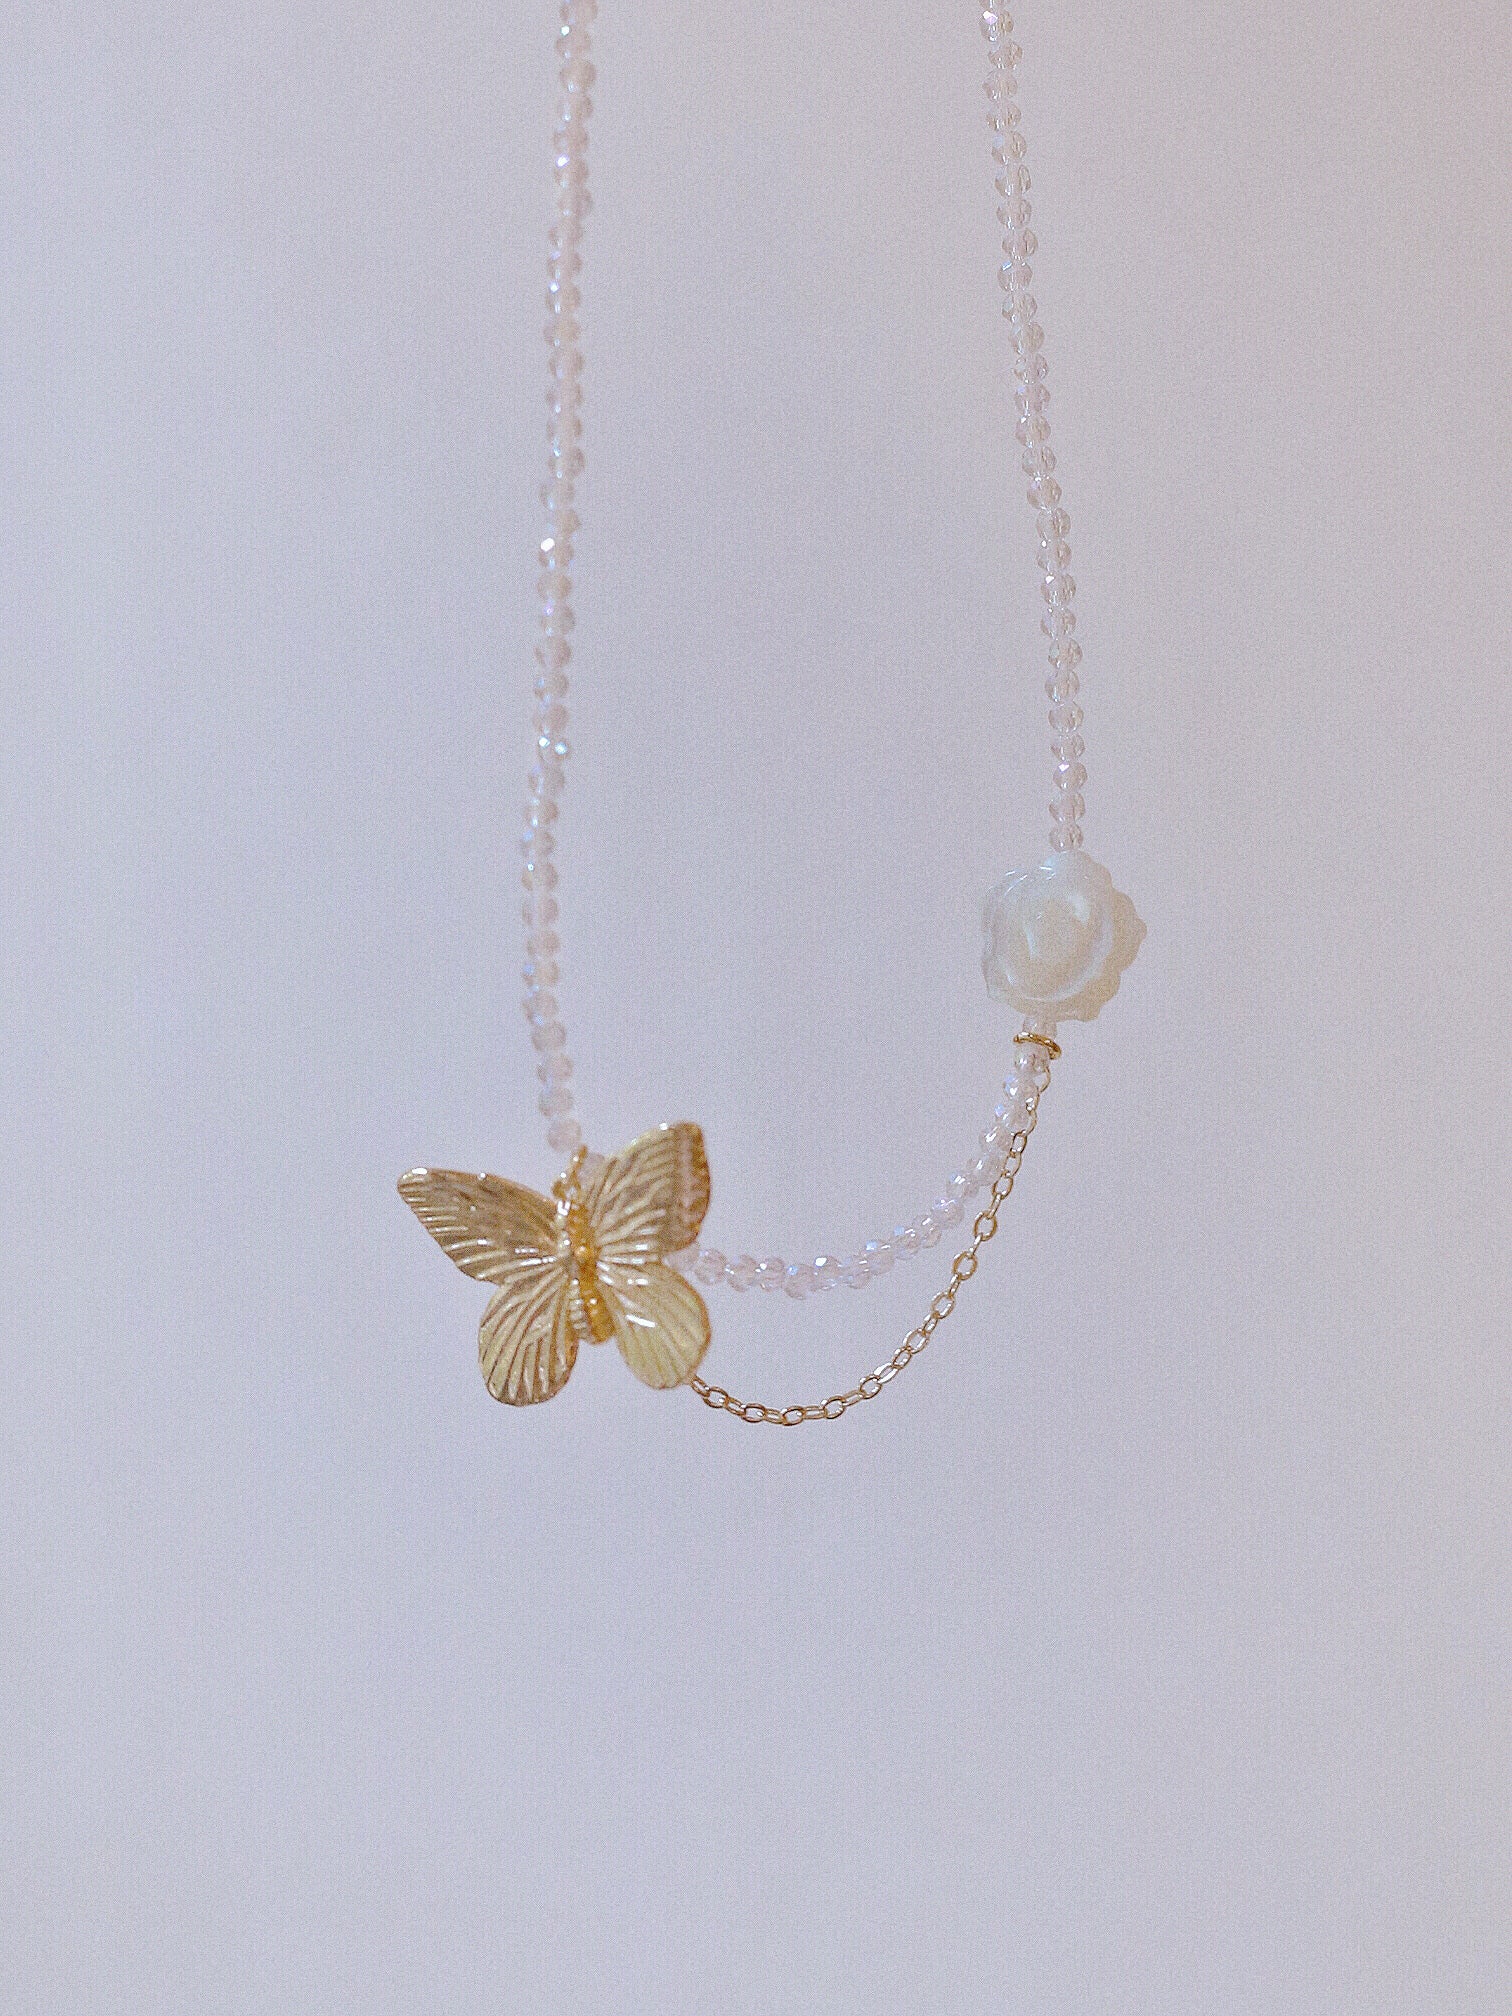 Golden Butterfly And White Rose Handmade Necklace/Choker